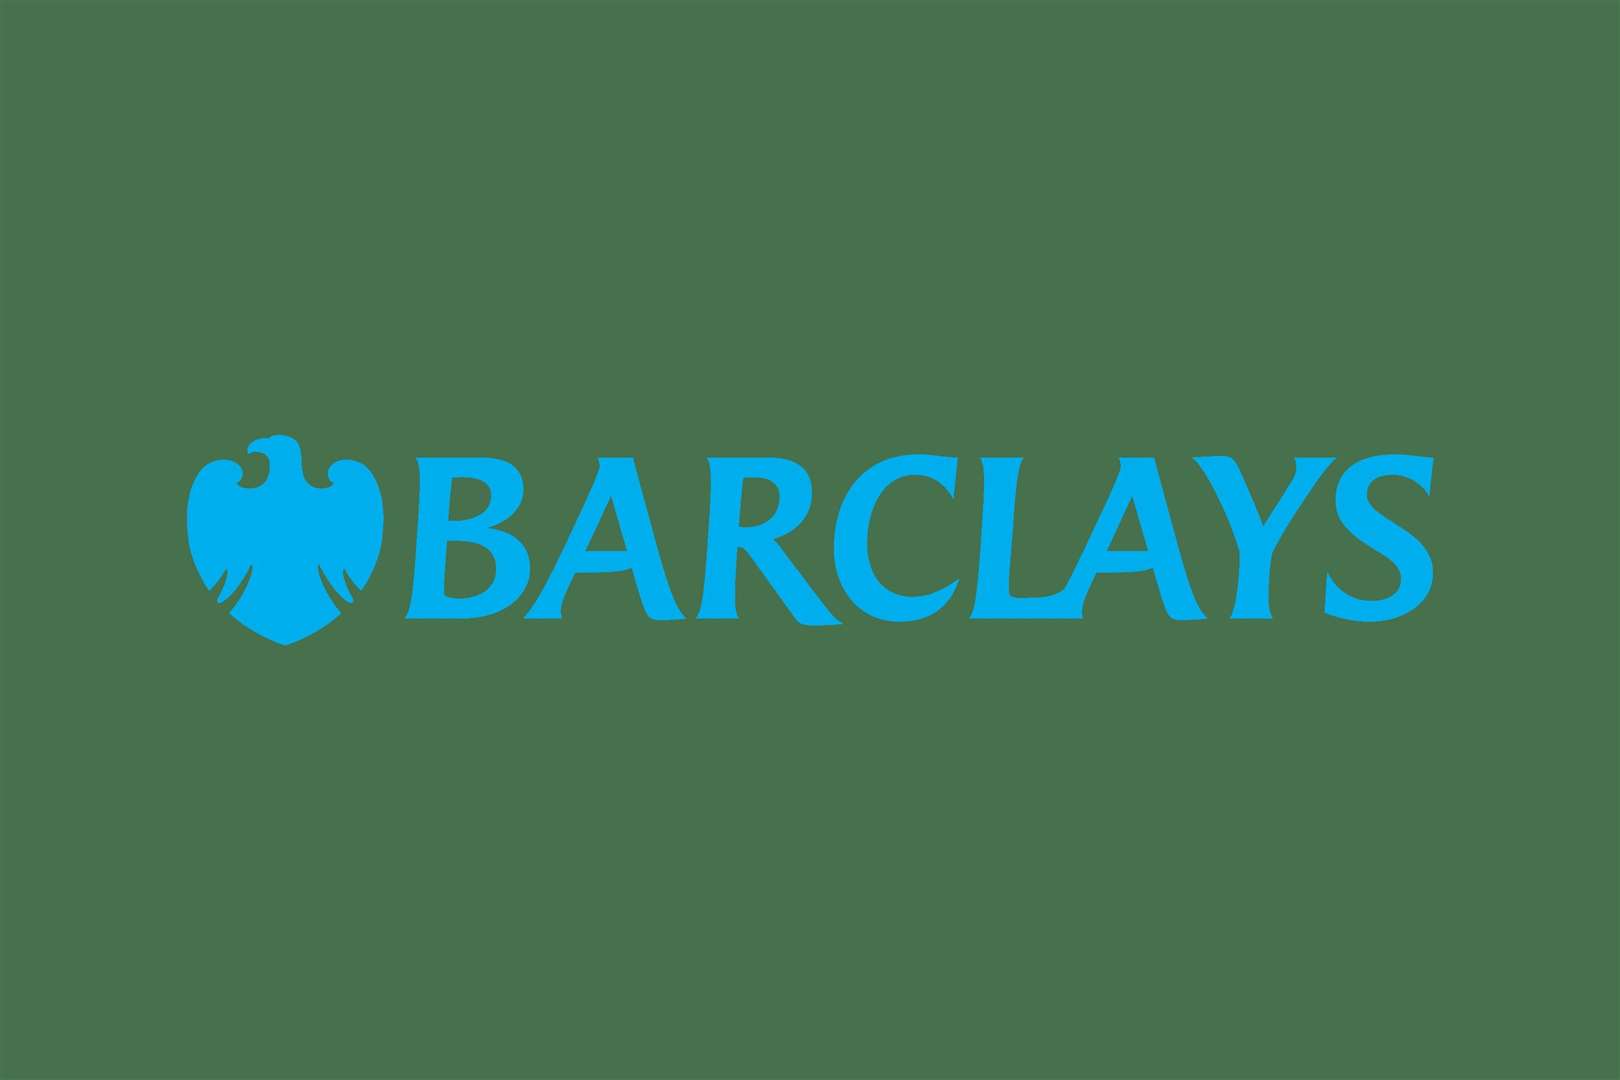 Barclays is closing four branches in Kent in 2021 - Whitstable and Strood have already closed followed by Dover in June and Faversham in August